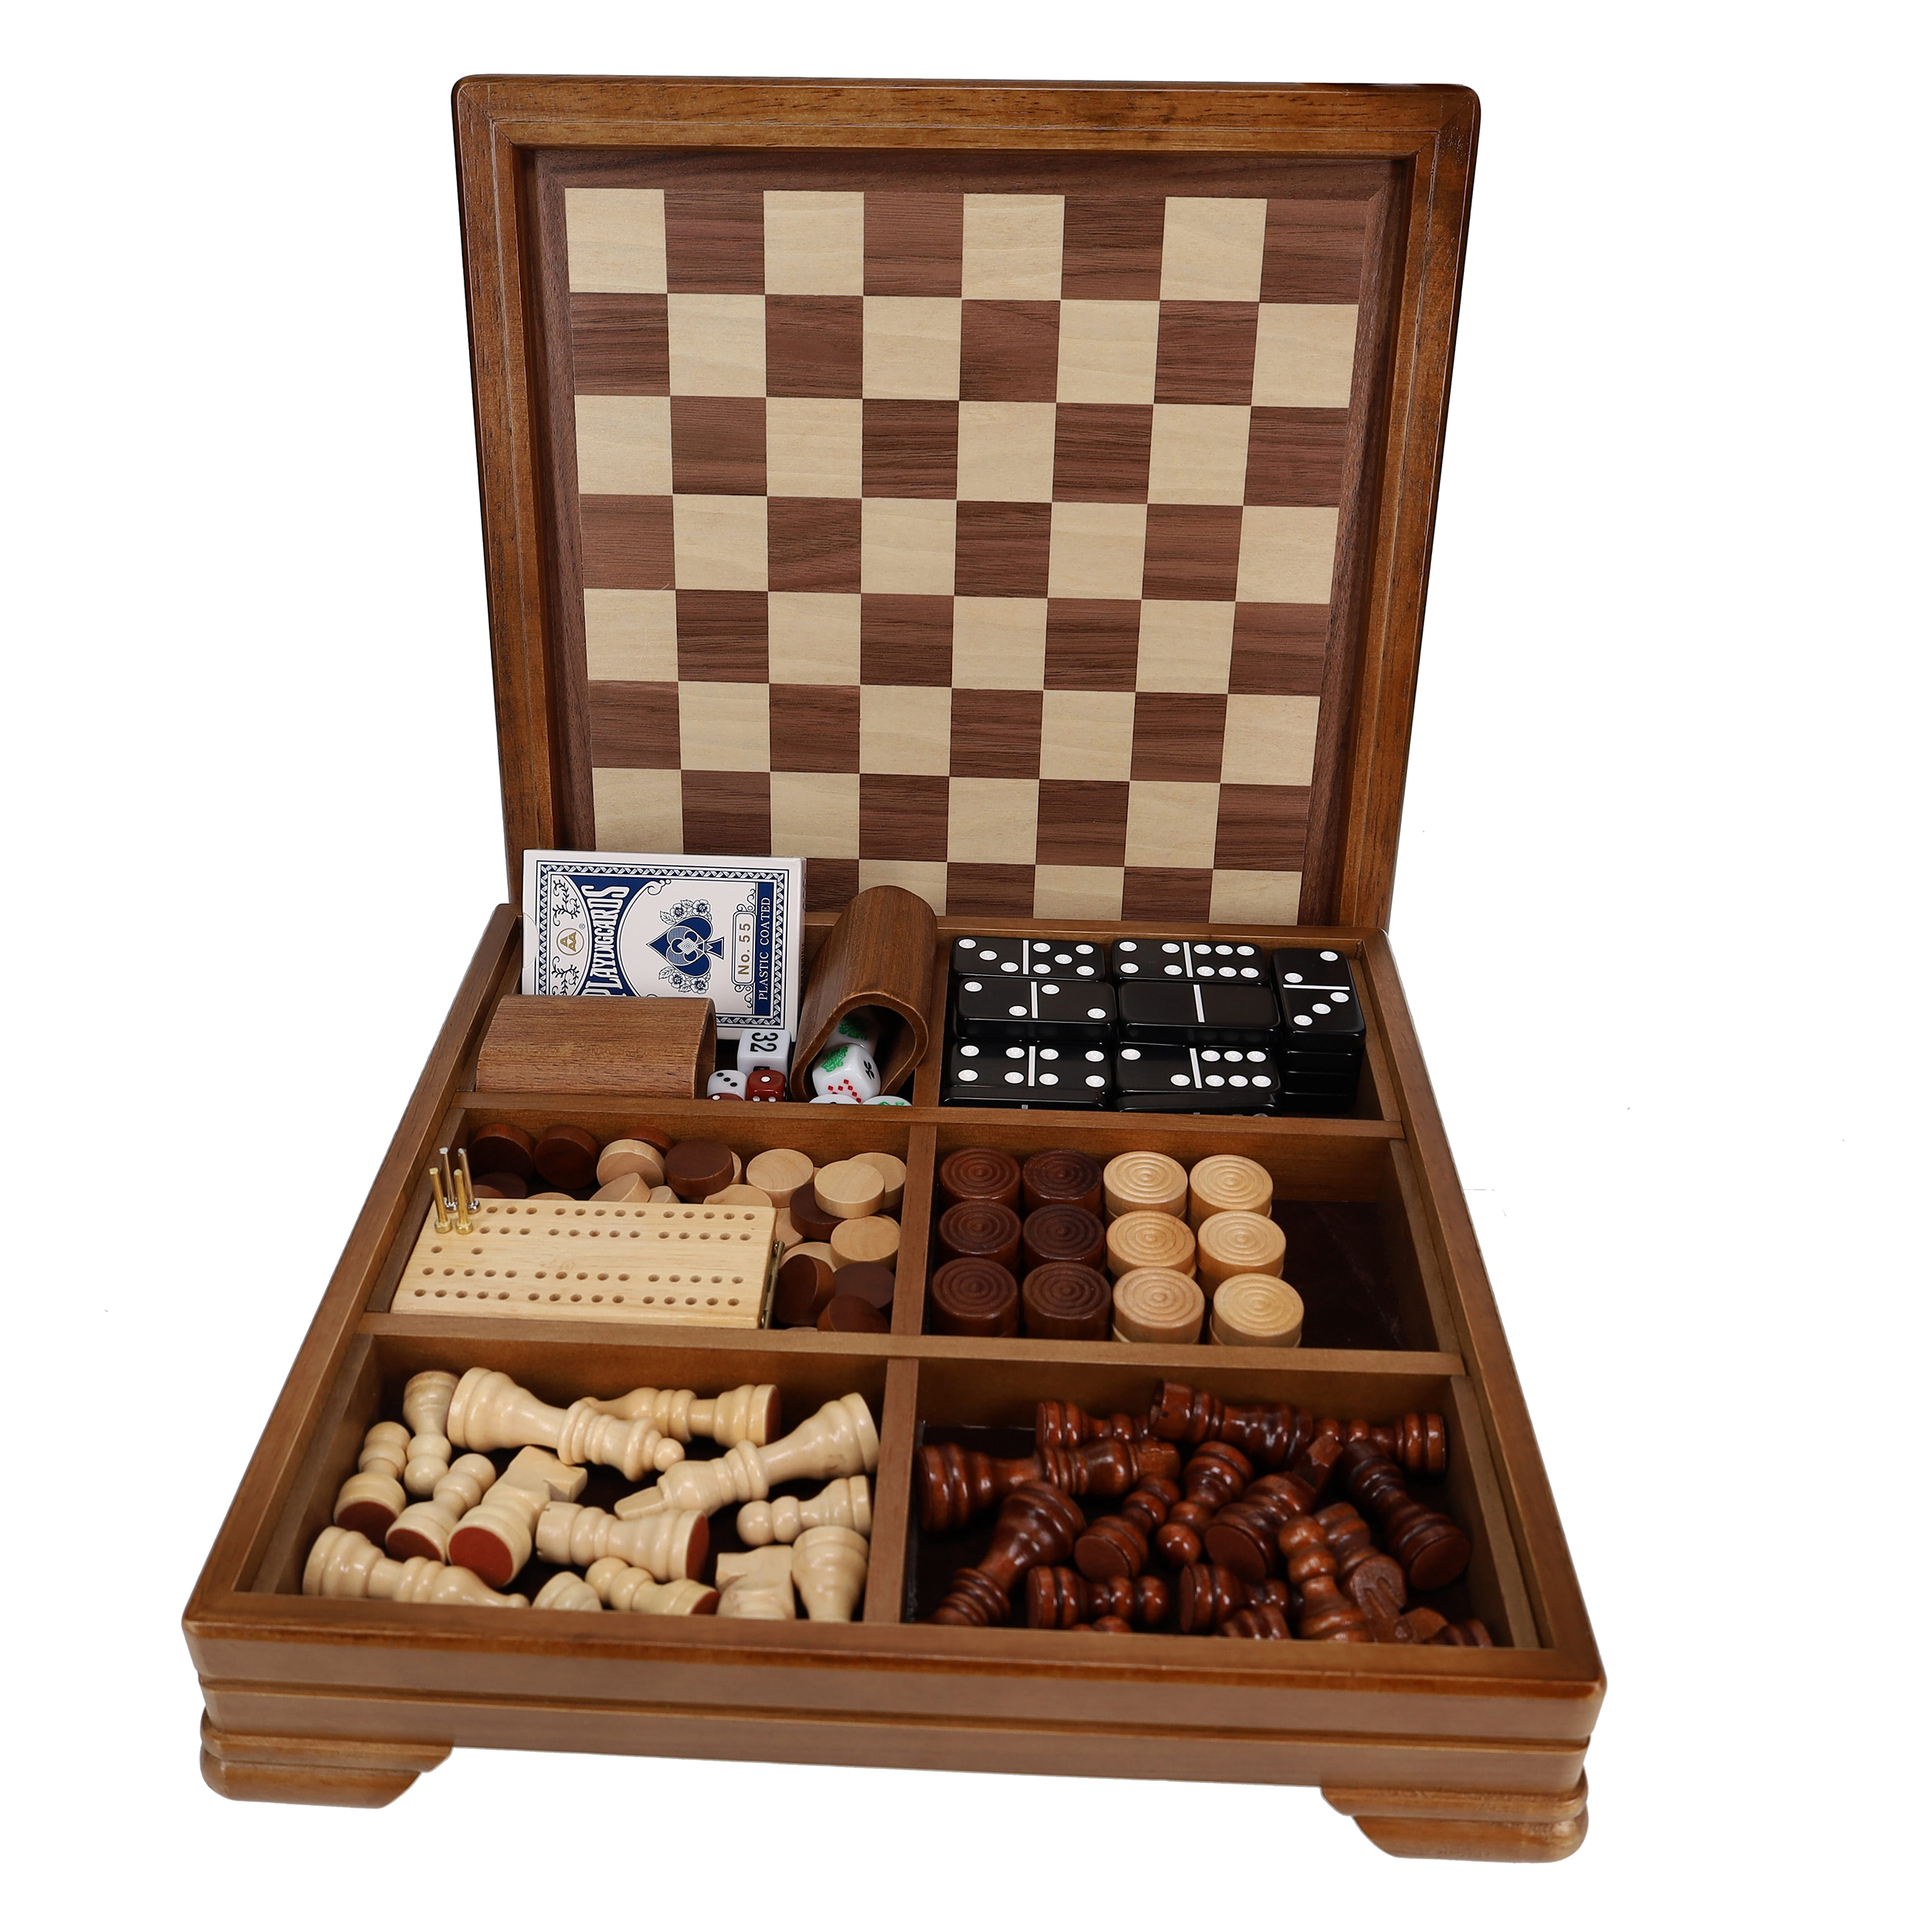 Offelec 9 in 1 Wood Board Classic Games Set Include Chess, Checkers,  Backgammon, Ludo, Nine Men's Morris, Dominoes, Playing Cards, Cribbage, and  Pick